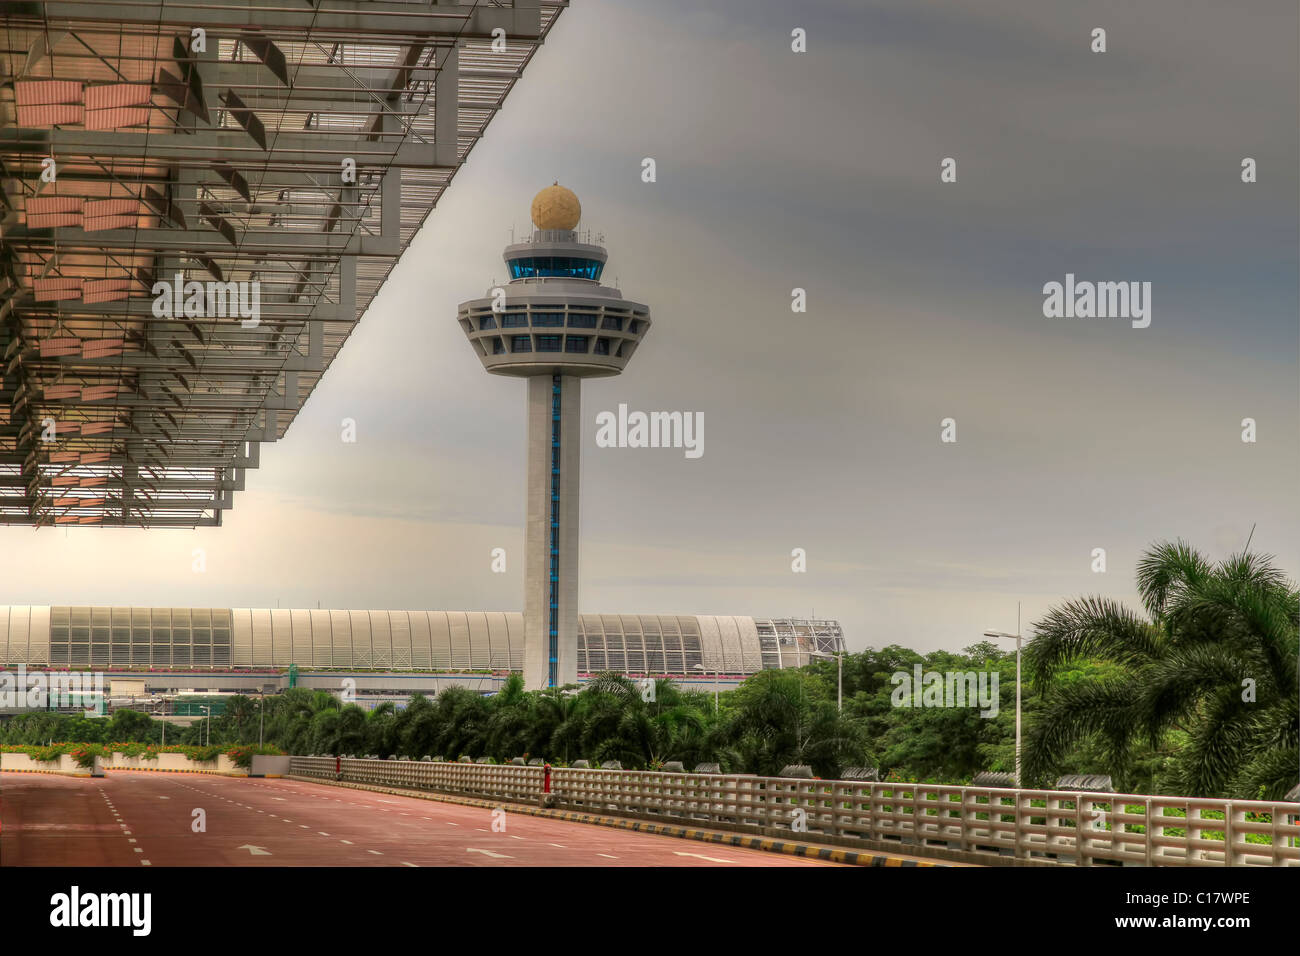 Changi Airport Traffic Controller Tower in Singapore 4 Stock Photo